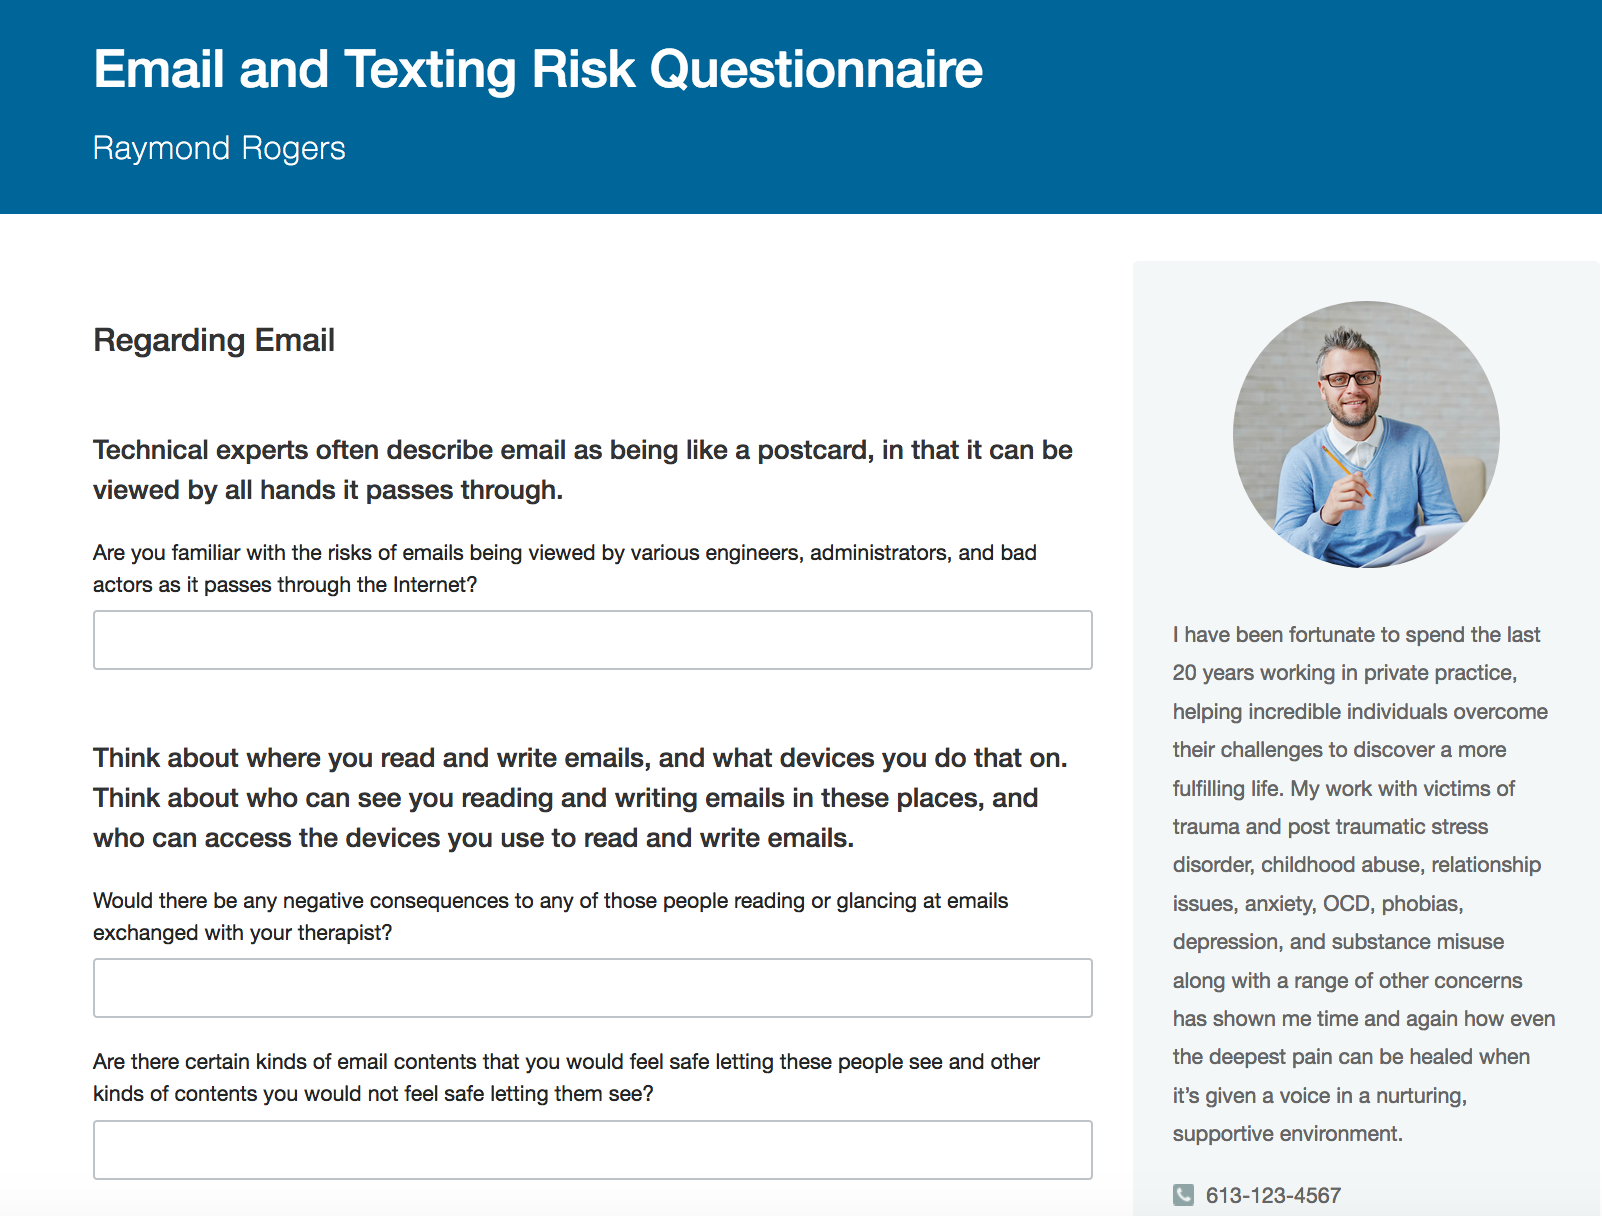 Email and texting risk